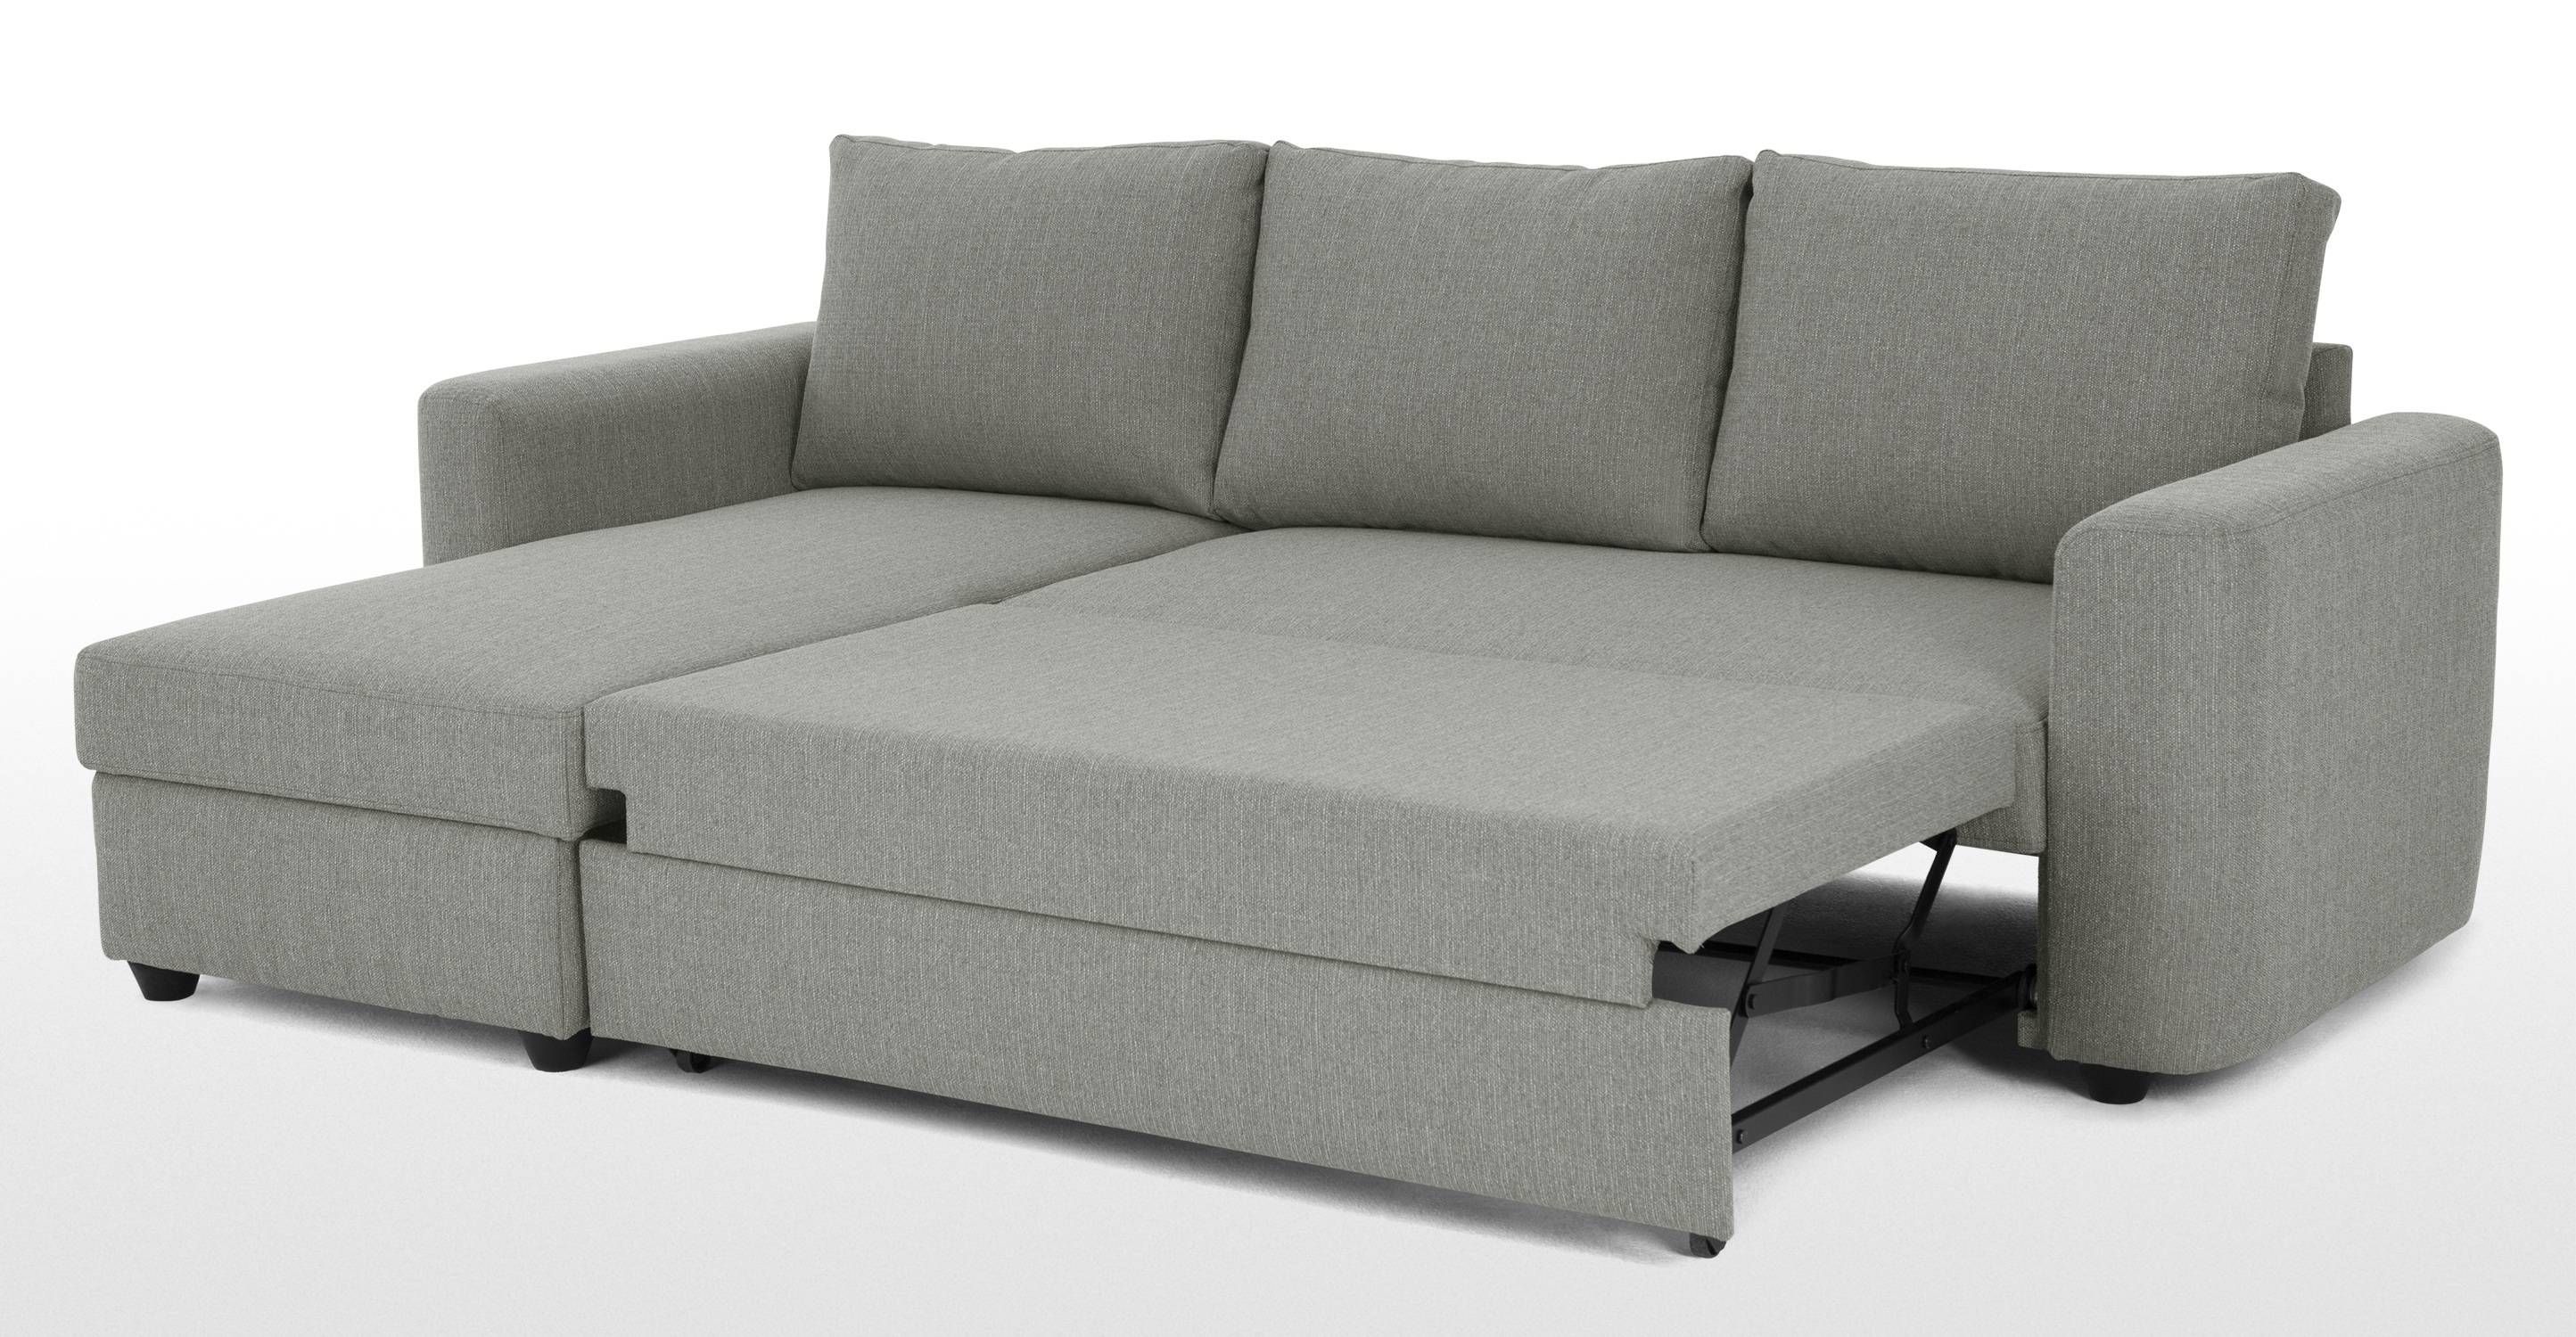 Aidian Corner Storage Sofa Bed, Silver Grey | Made With Regard To Corner Couch Bed (View 1 of 30)